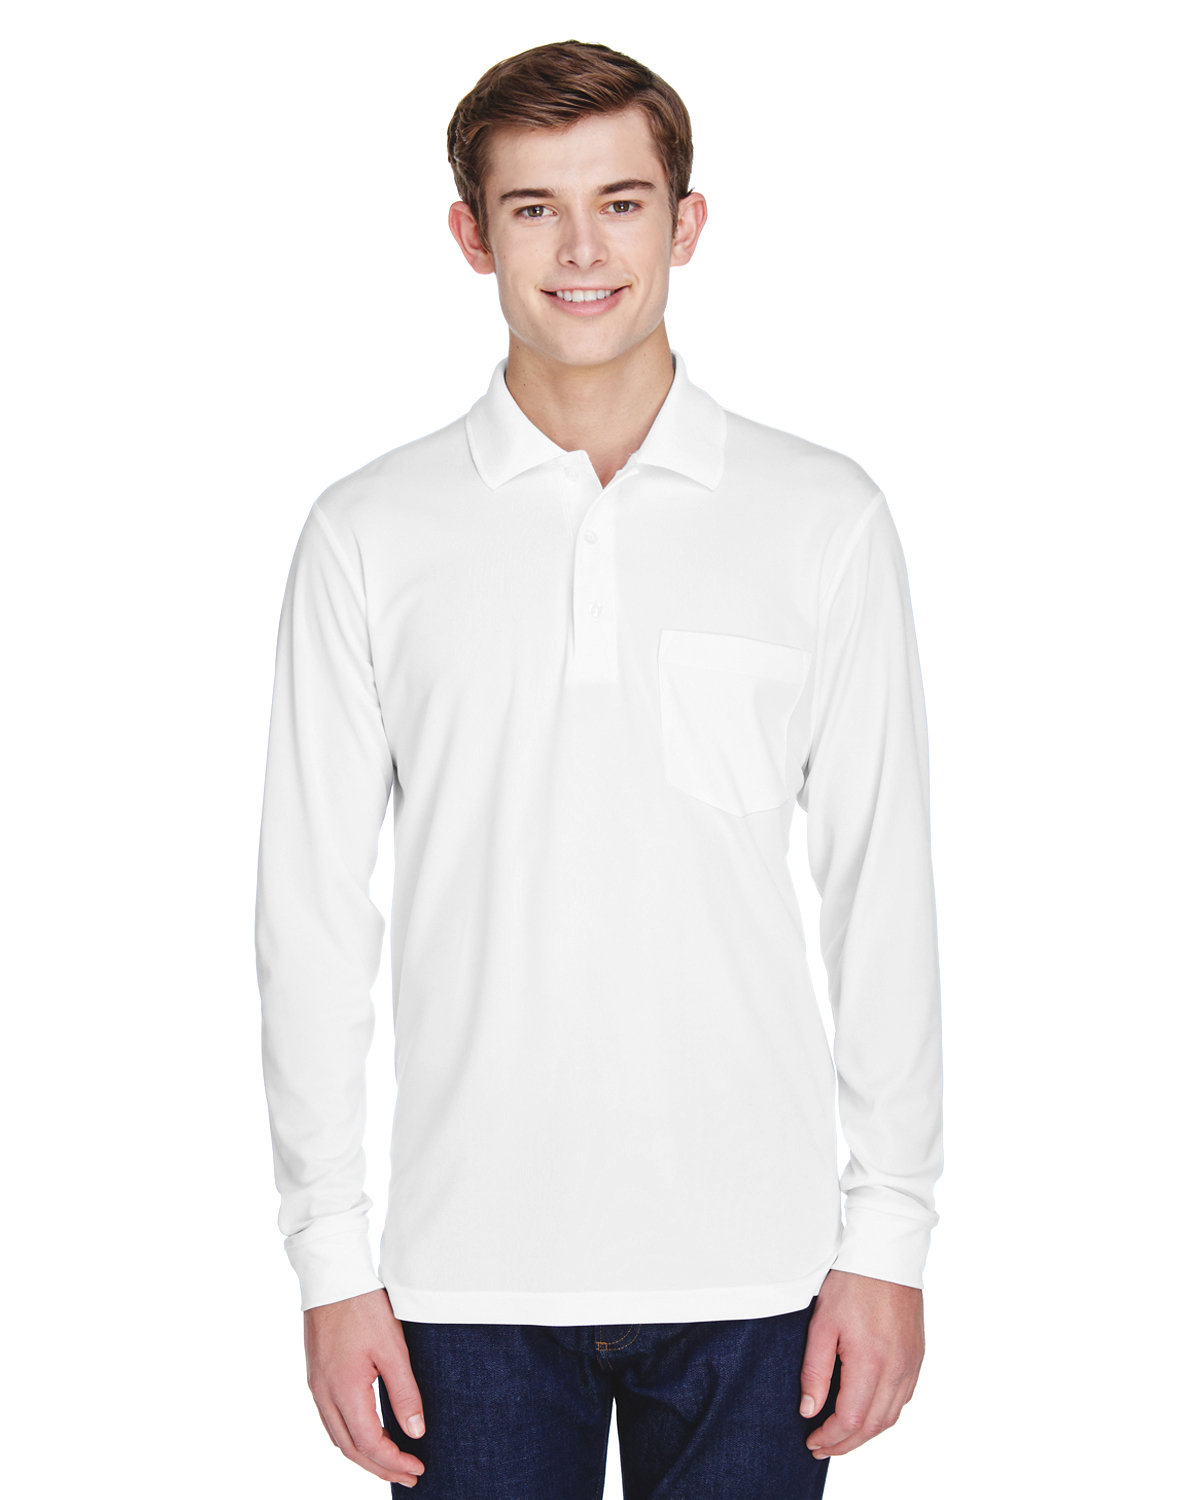 Core365 Adult Pinnacle Performance Long-Sleeve Piqué Polo with Pocket WHITE 